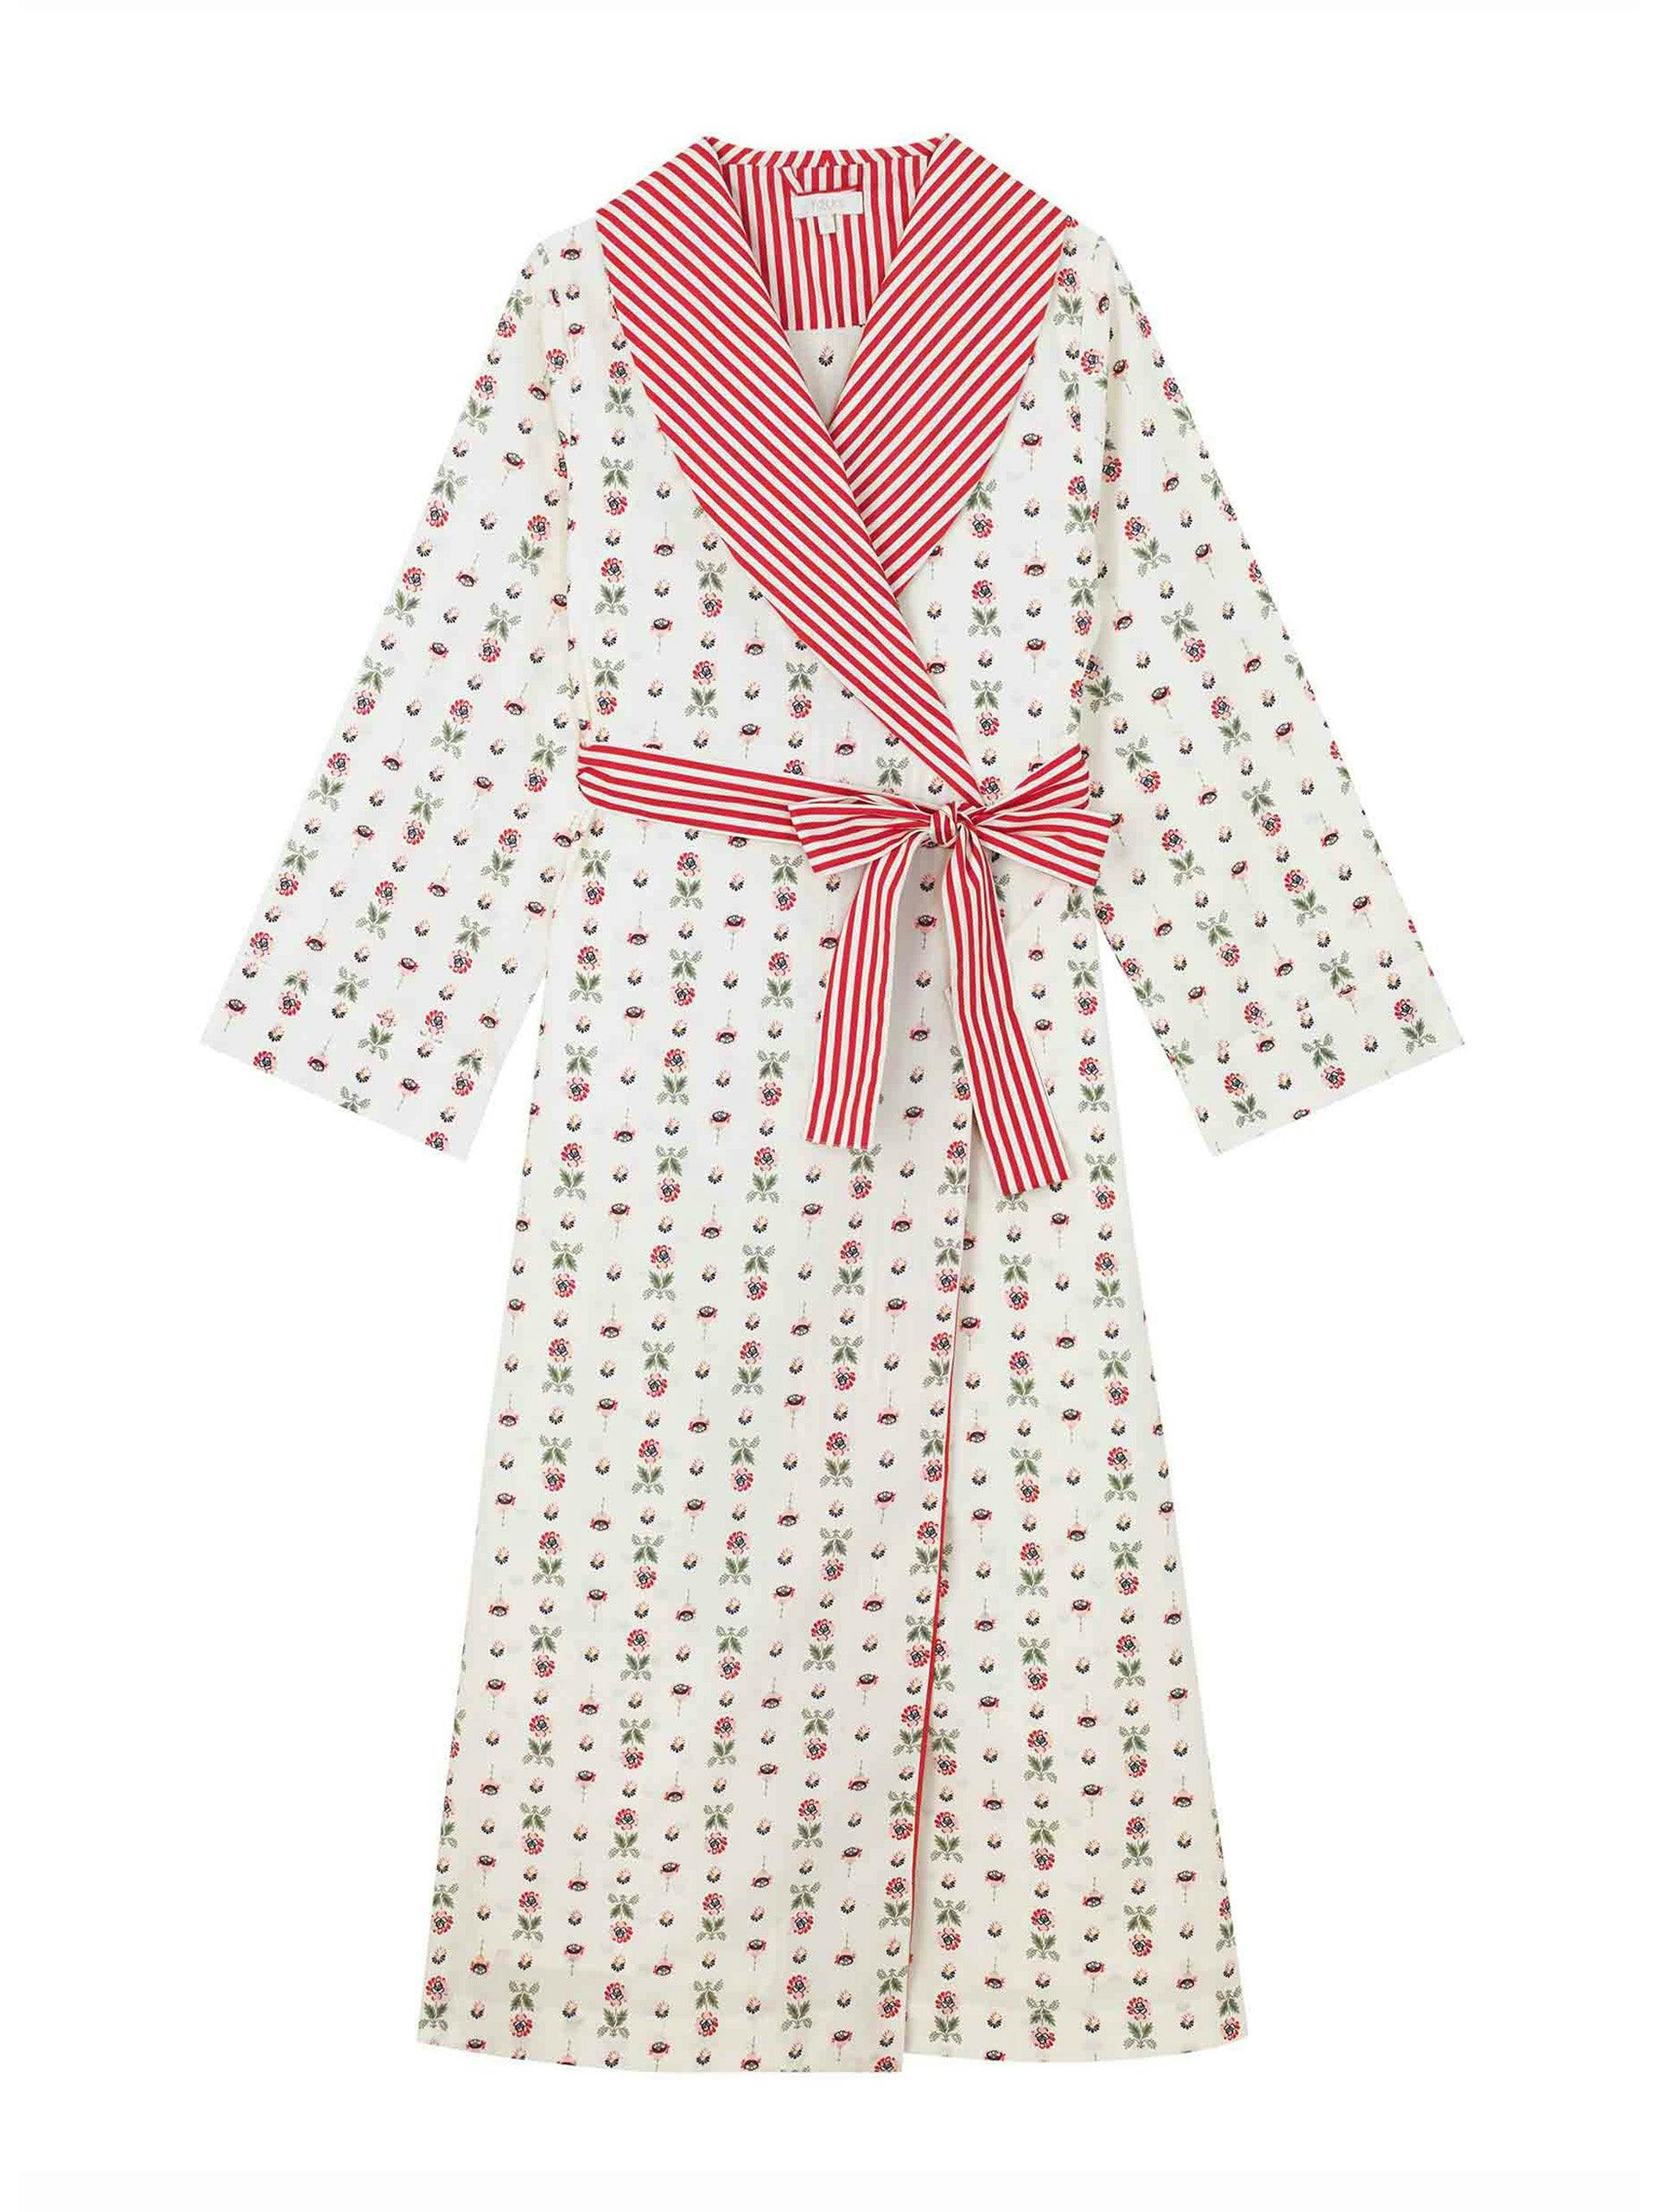 Winter Rose print dressing gown